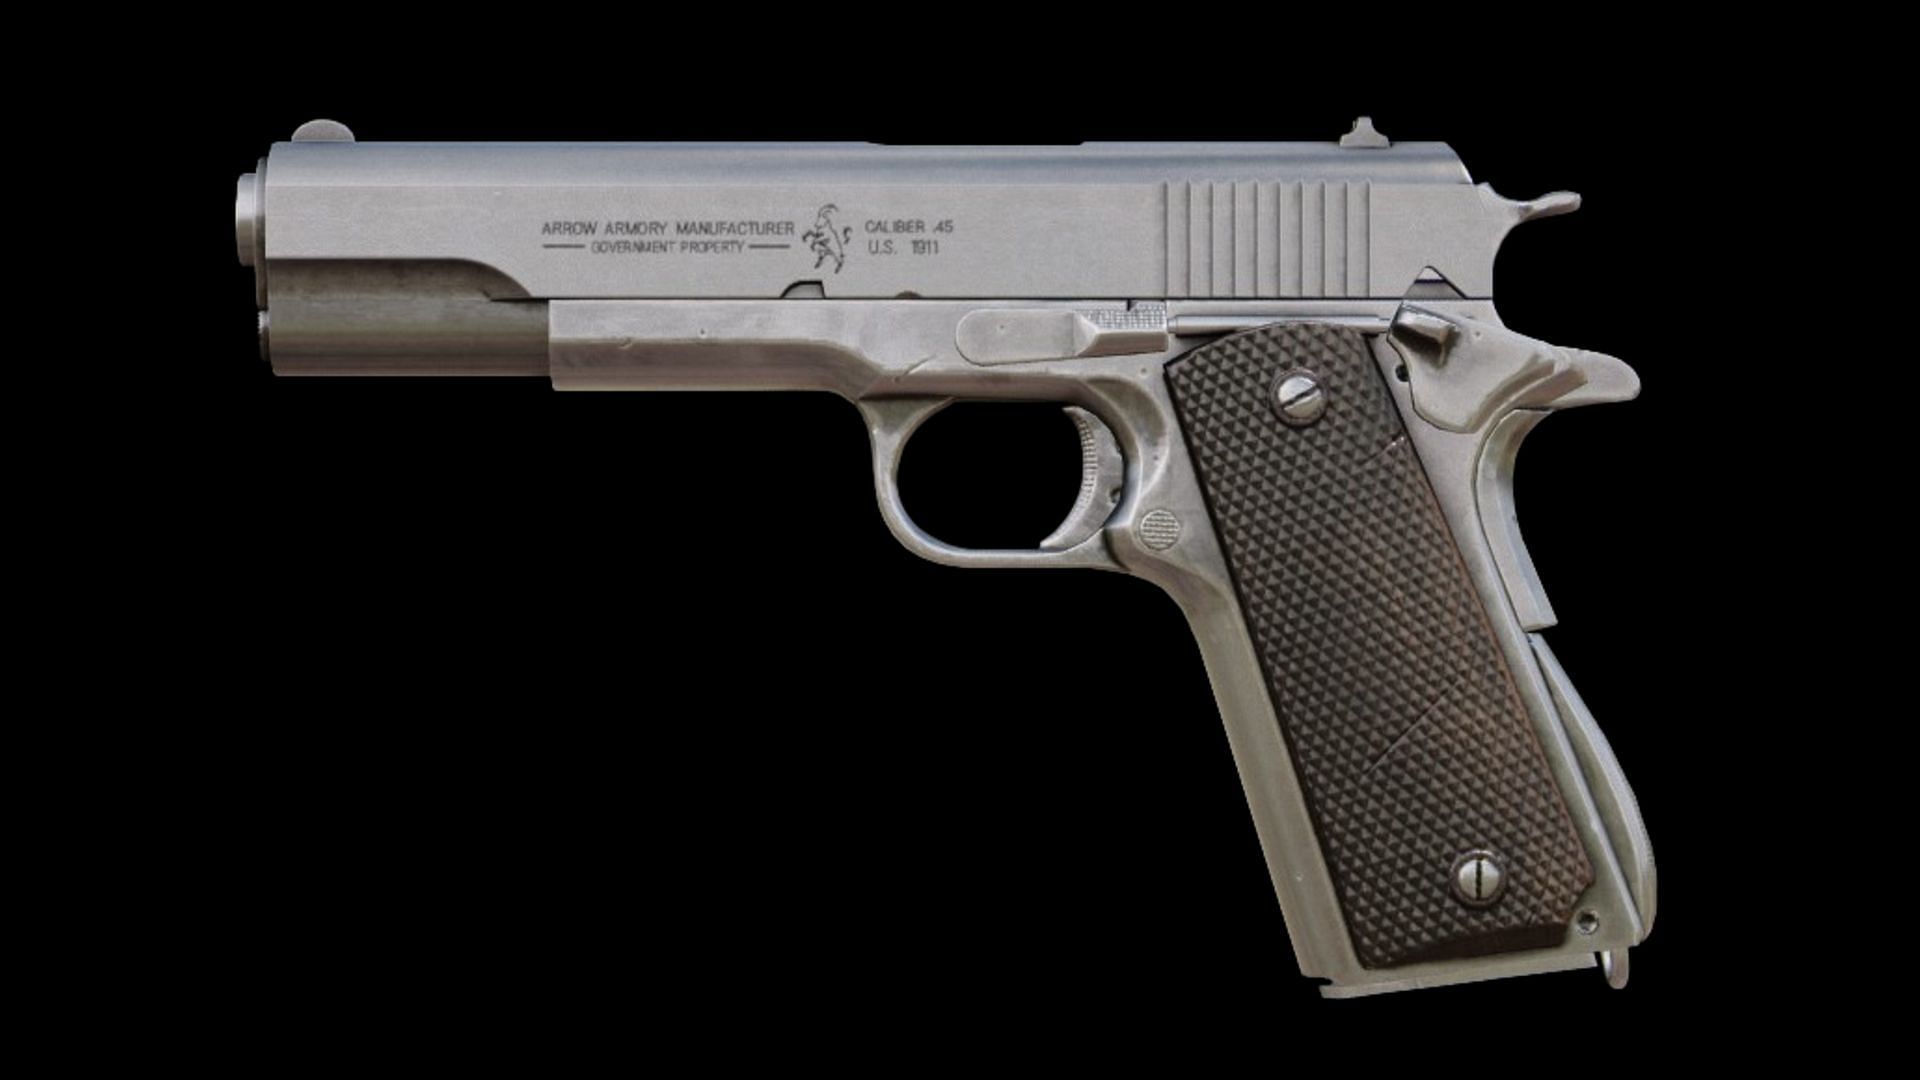 M1911, Call of Duty Wiki